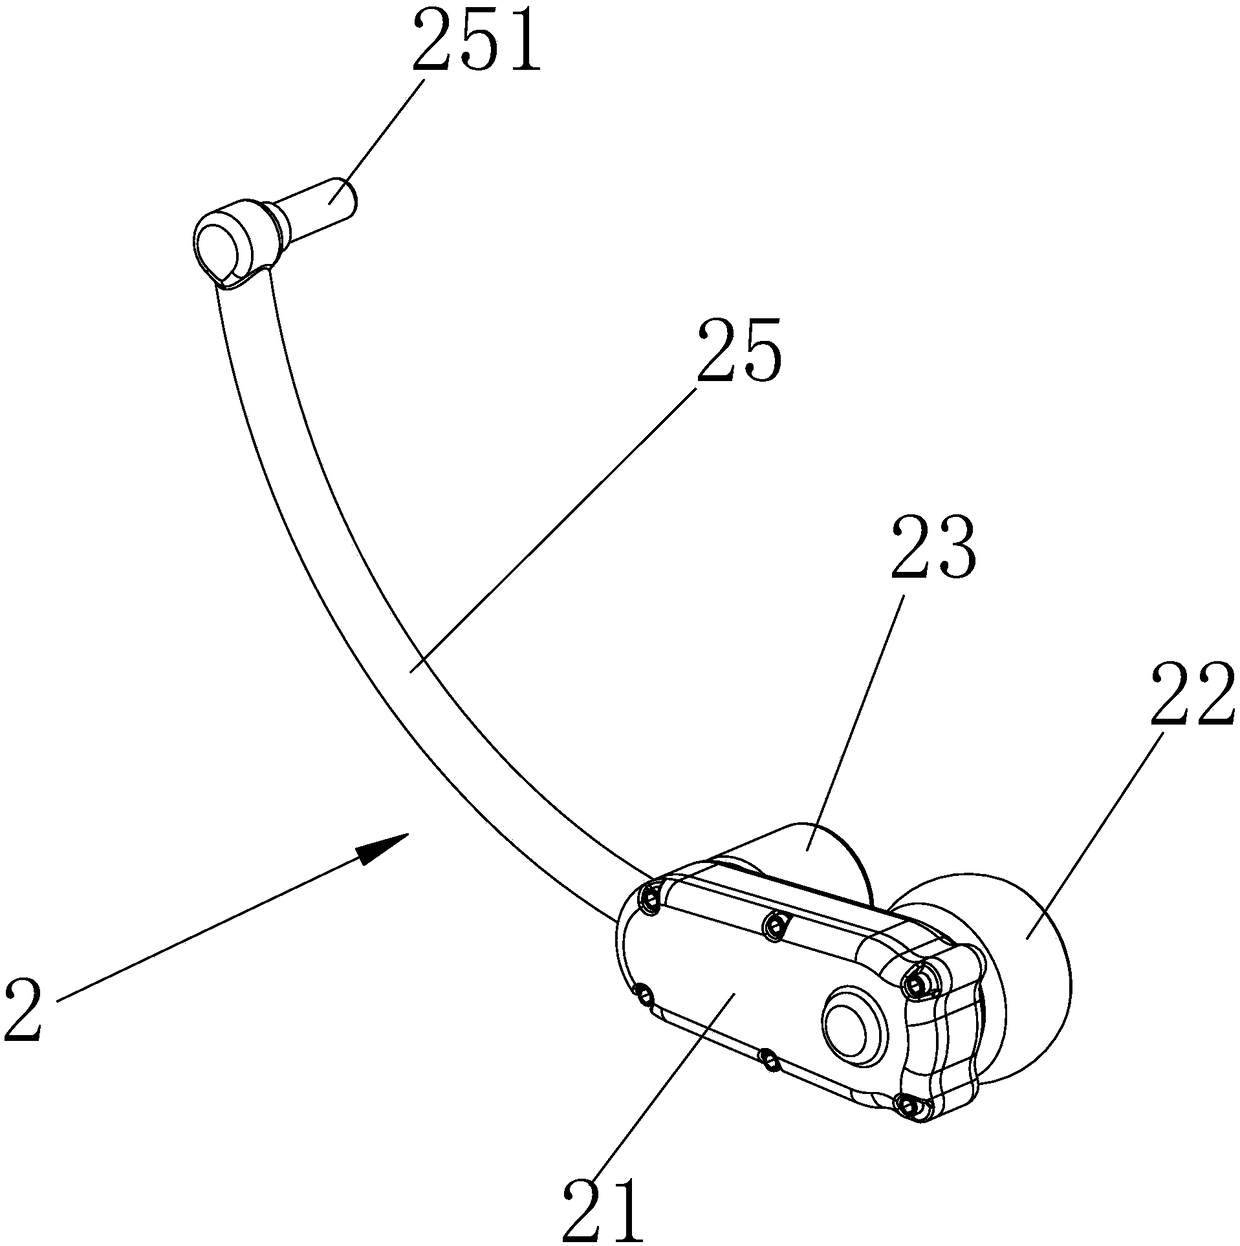 Single-wheel and single-roller bicycle game device